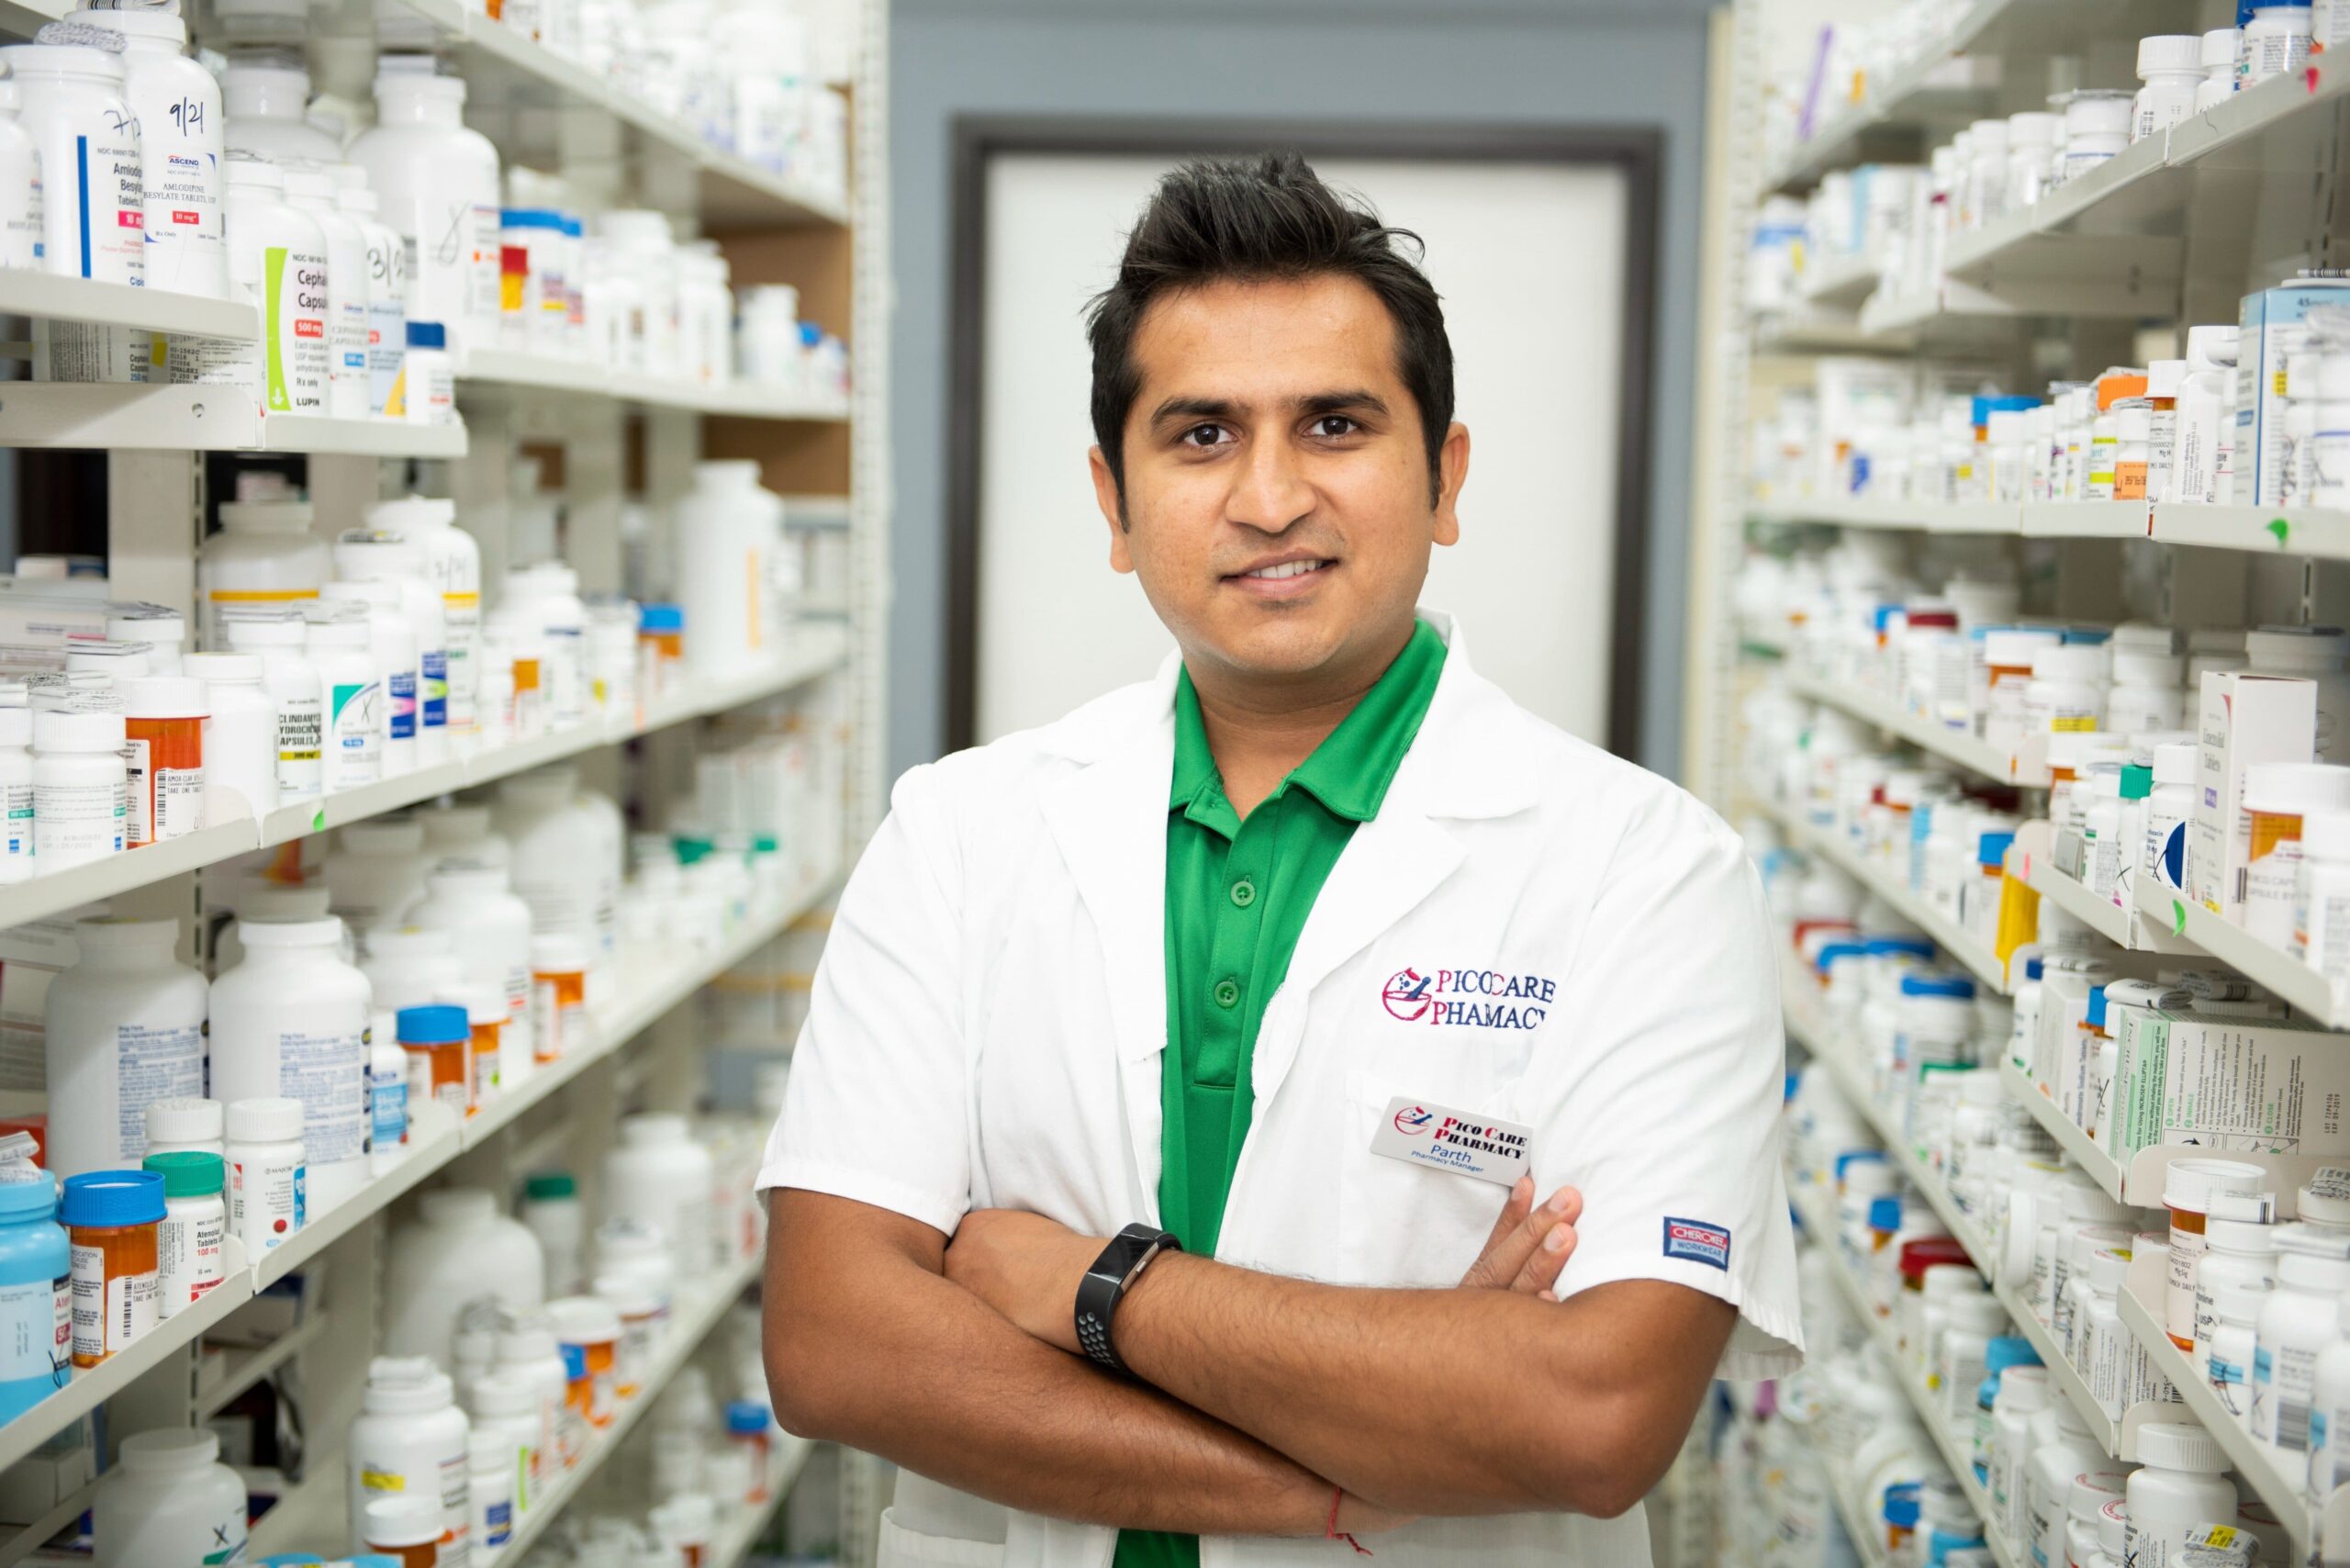 About The Owner of Pico Care Pharmacy